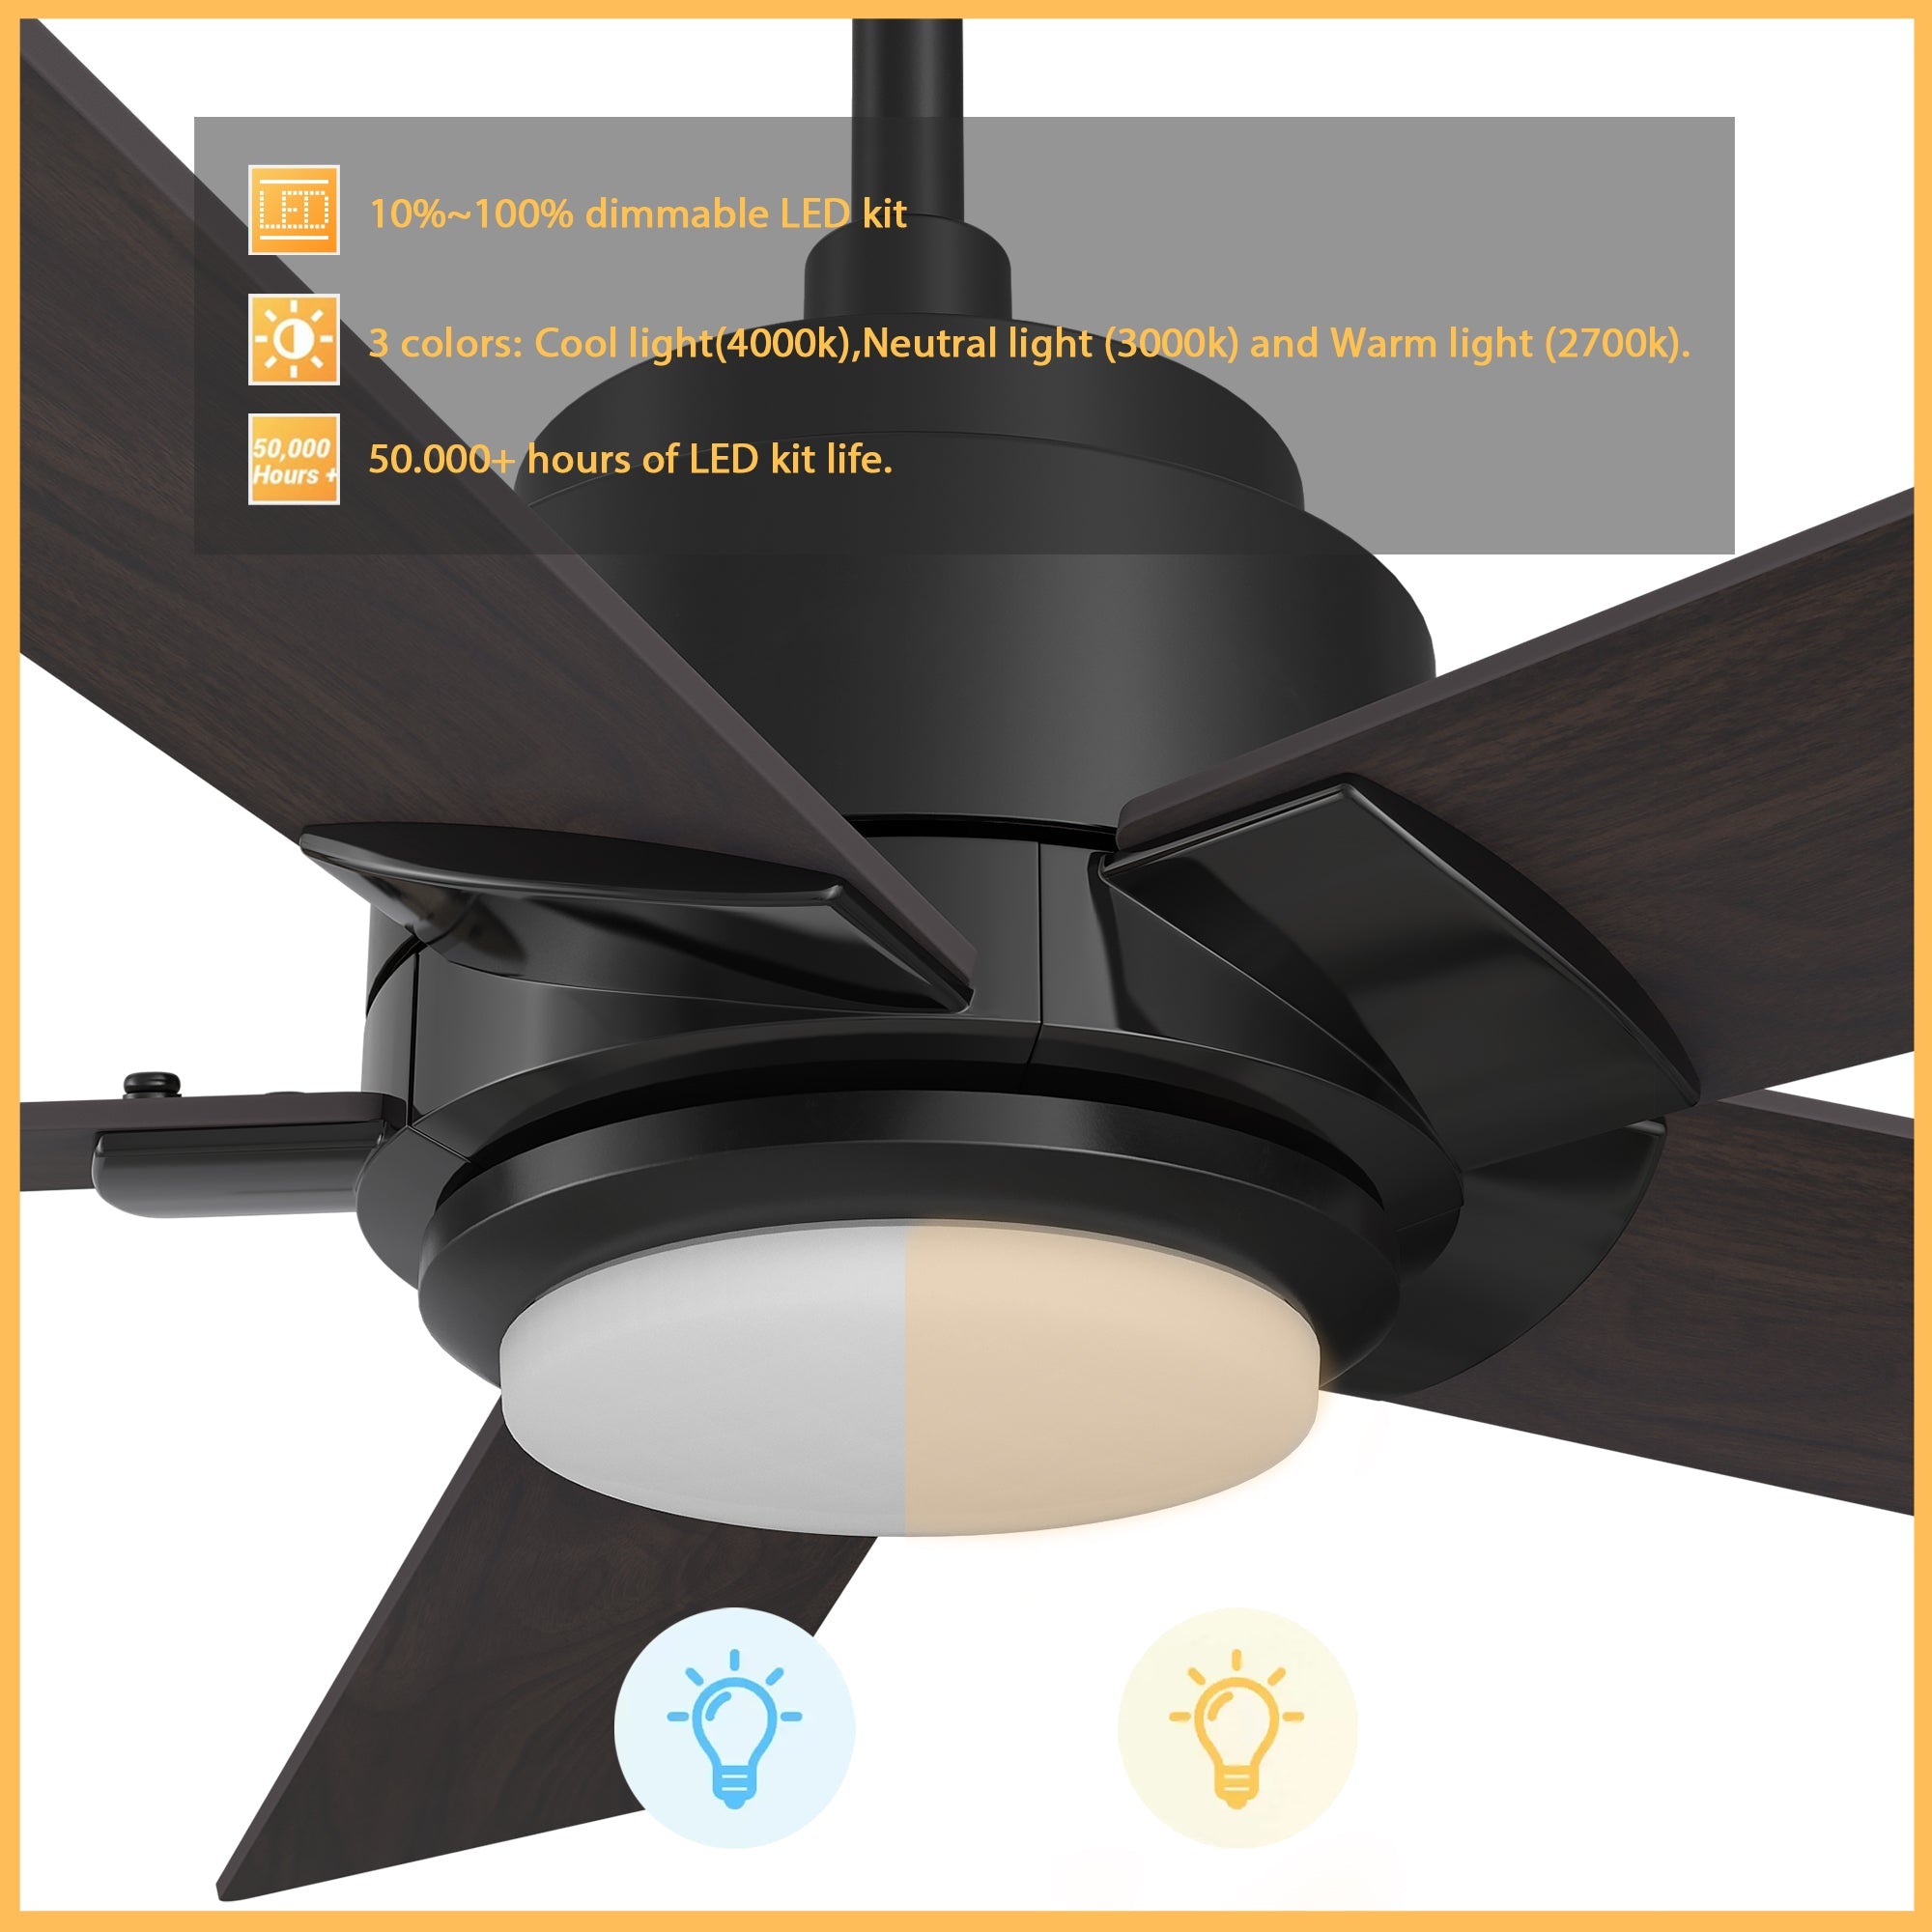 This Aspen 56&#39;&#39; smart ceiling fan keeps your space cool, bright, and stylish. It is a soft modern masterpiece perfect for your large indoor living spaces. This Wifi smart ceiling fan is a simplicity designing with Black finish, use elegant Plywood blades and has an integrated 3998K LED daylight. The fan features Remote control, Wi-Fi apps, Siri Shortcut and Voice control technology (compatible with Amazon Alexa and Google Home Assistant ) to set fan preferences. 